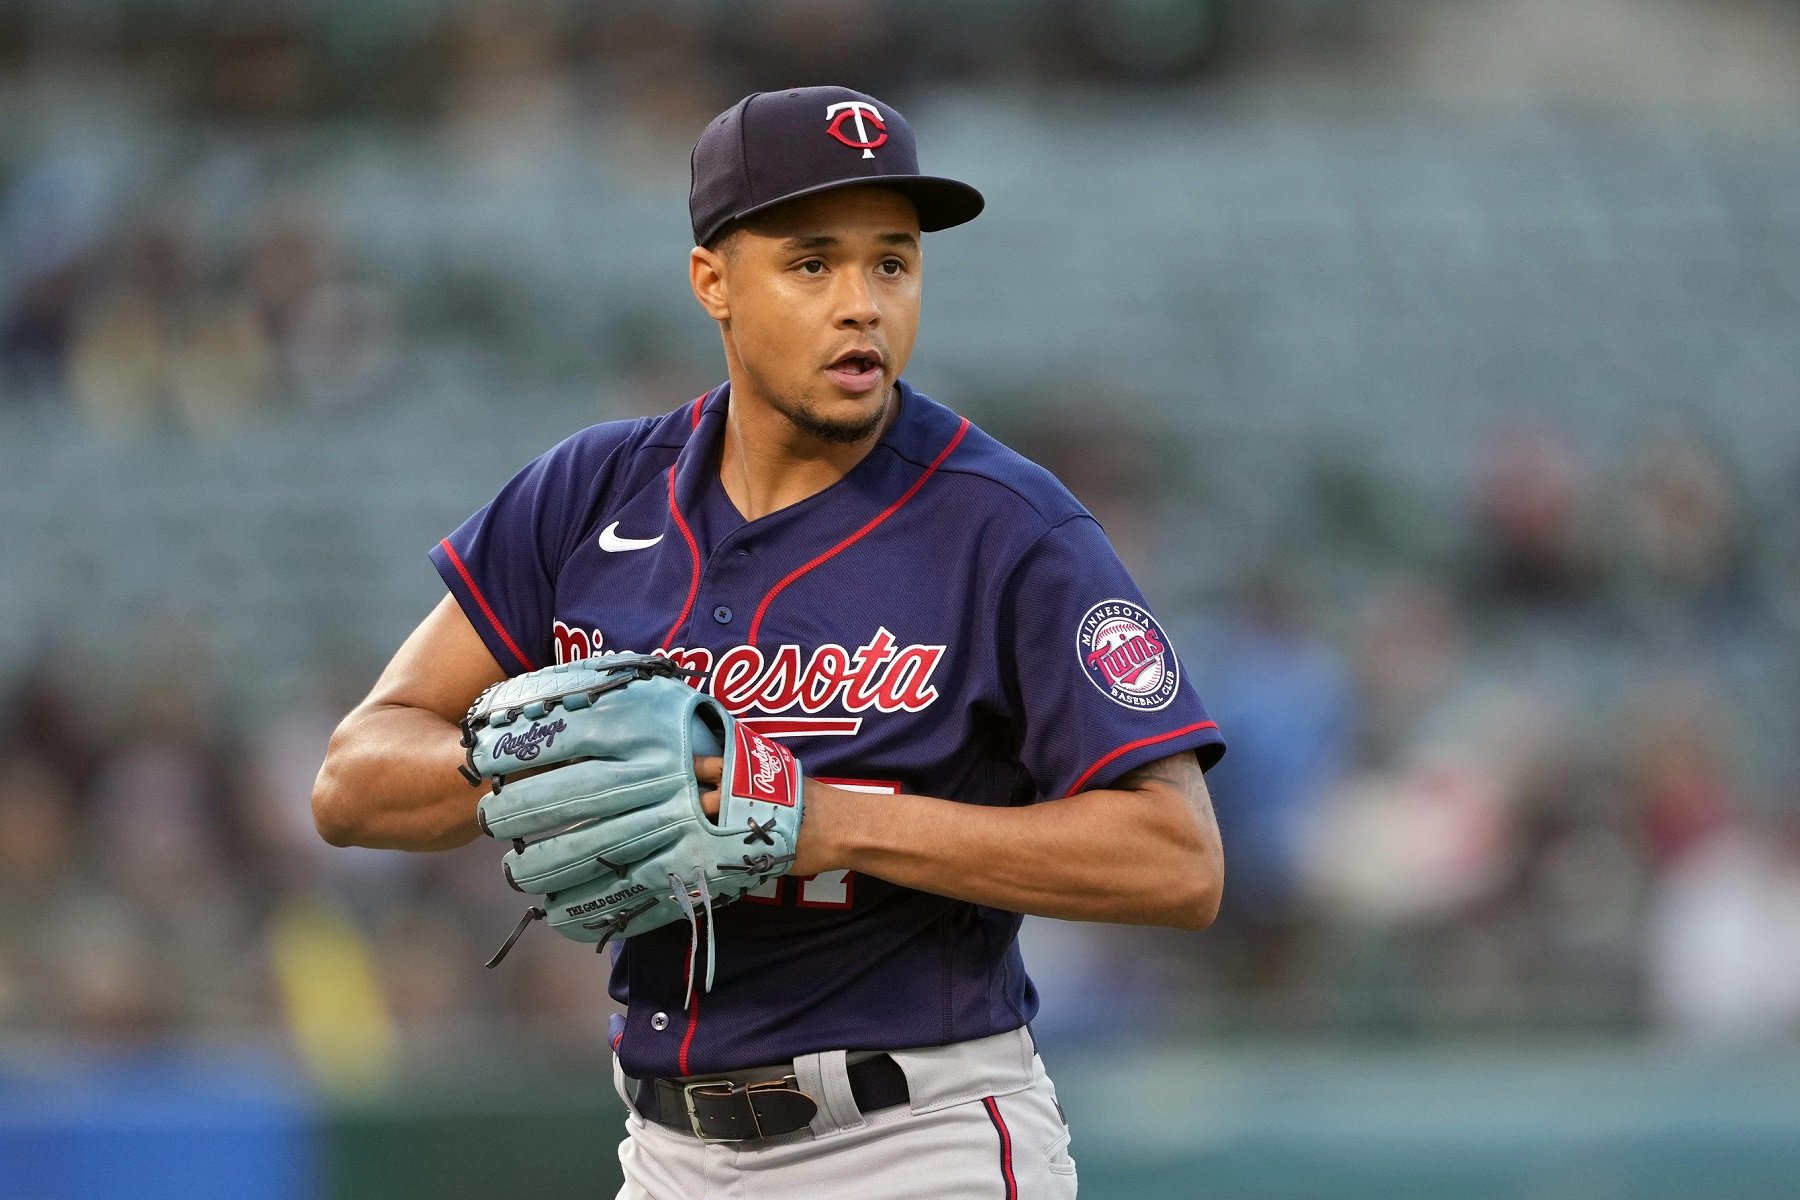 New Twins starting pitcher Chris Archer reports to camp healthy